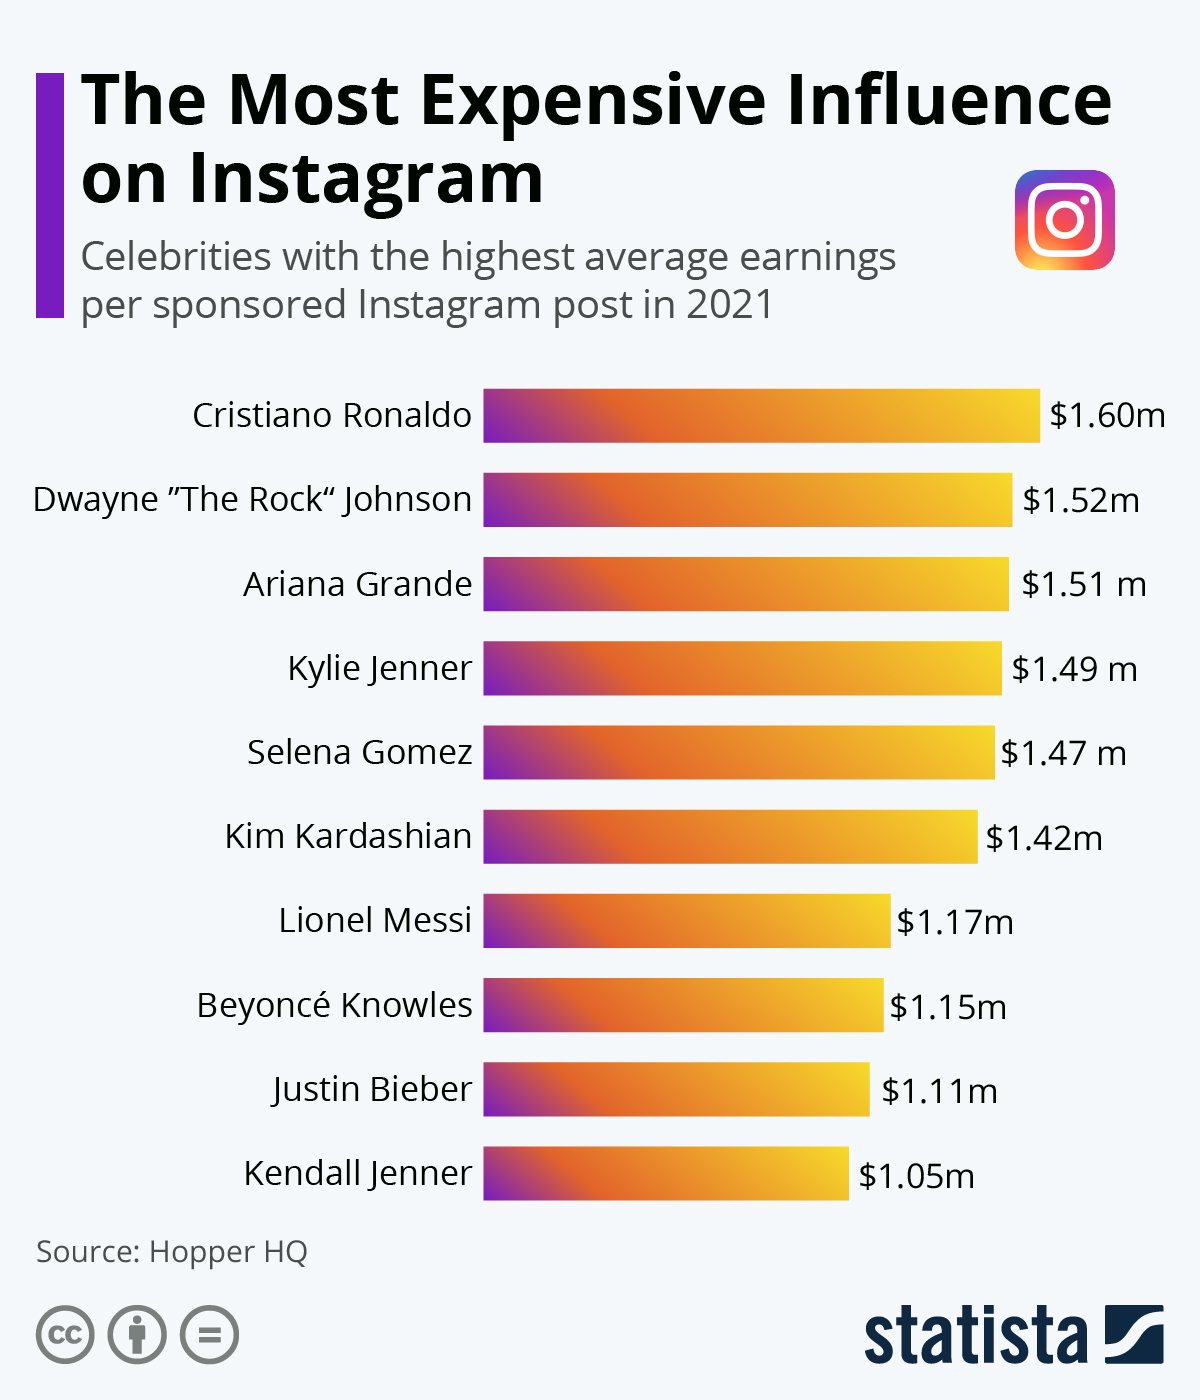 The Most Expensive Influence on Instagram